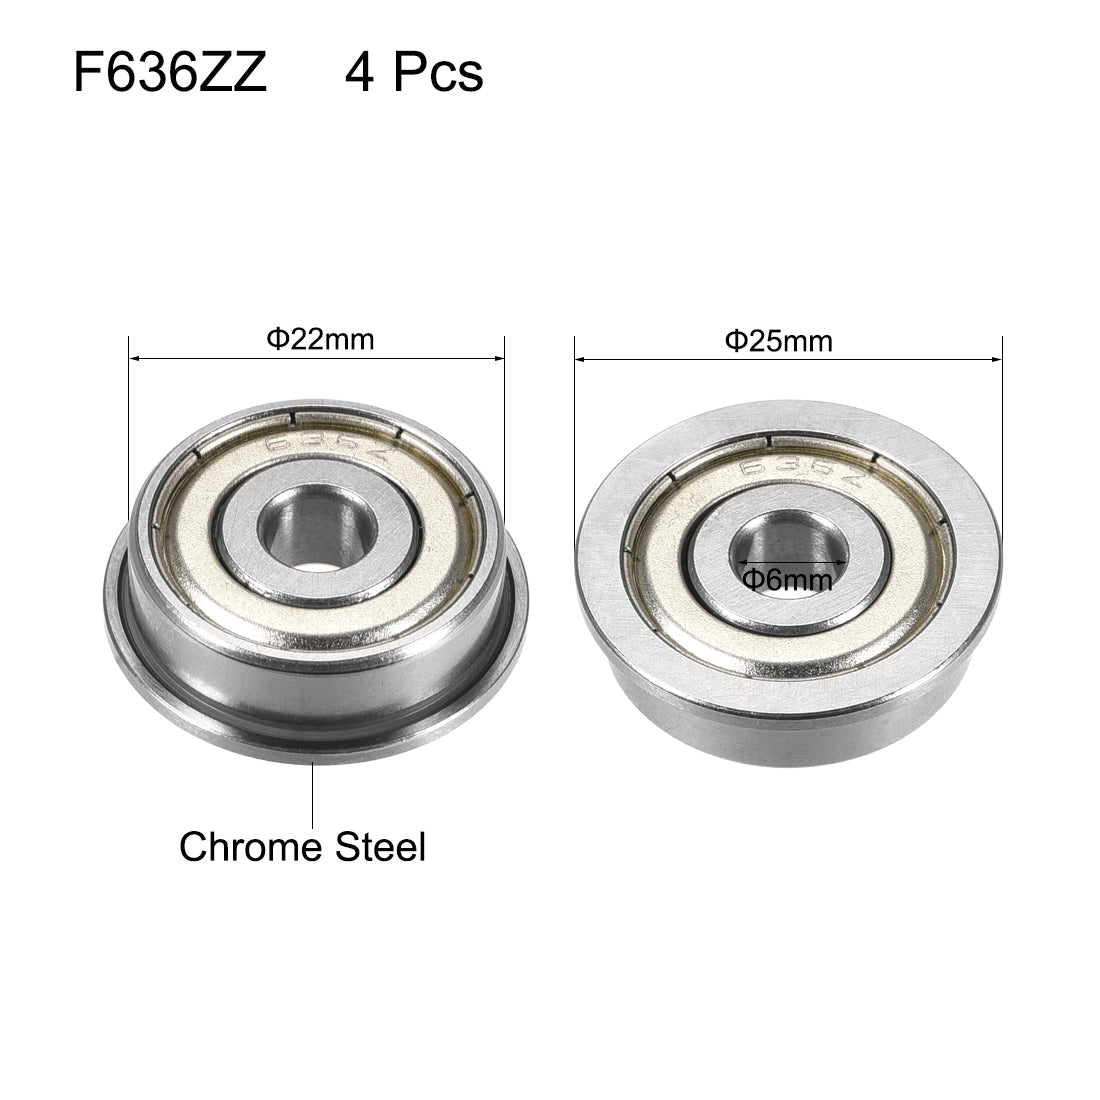 uxcell Uxcell F636ZZ Flange Ball Bearing 6x22x7mm Double Shielded Chrome Steel Bearings 4pcs